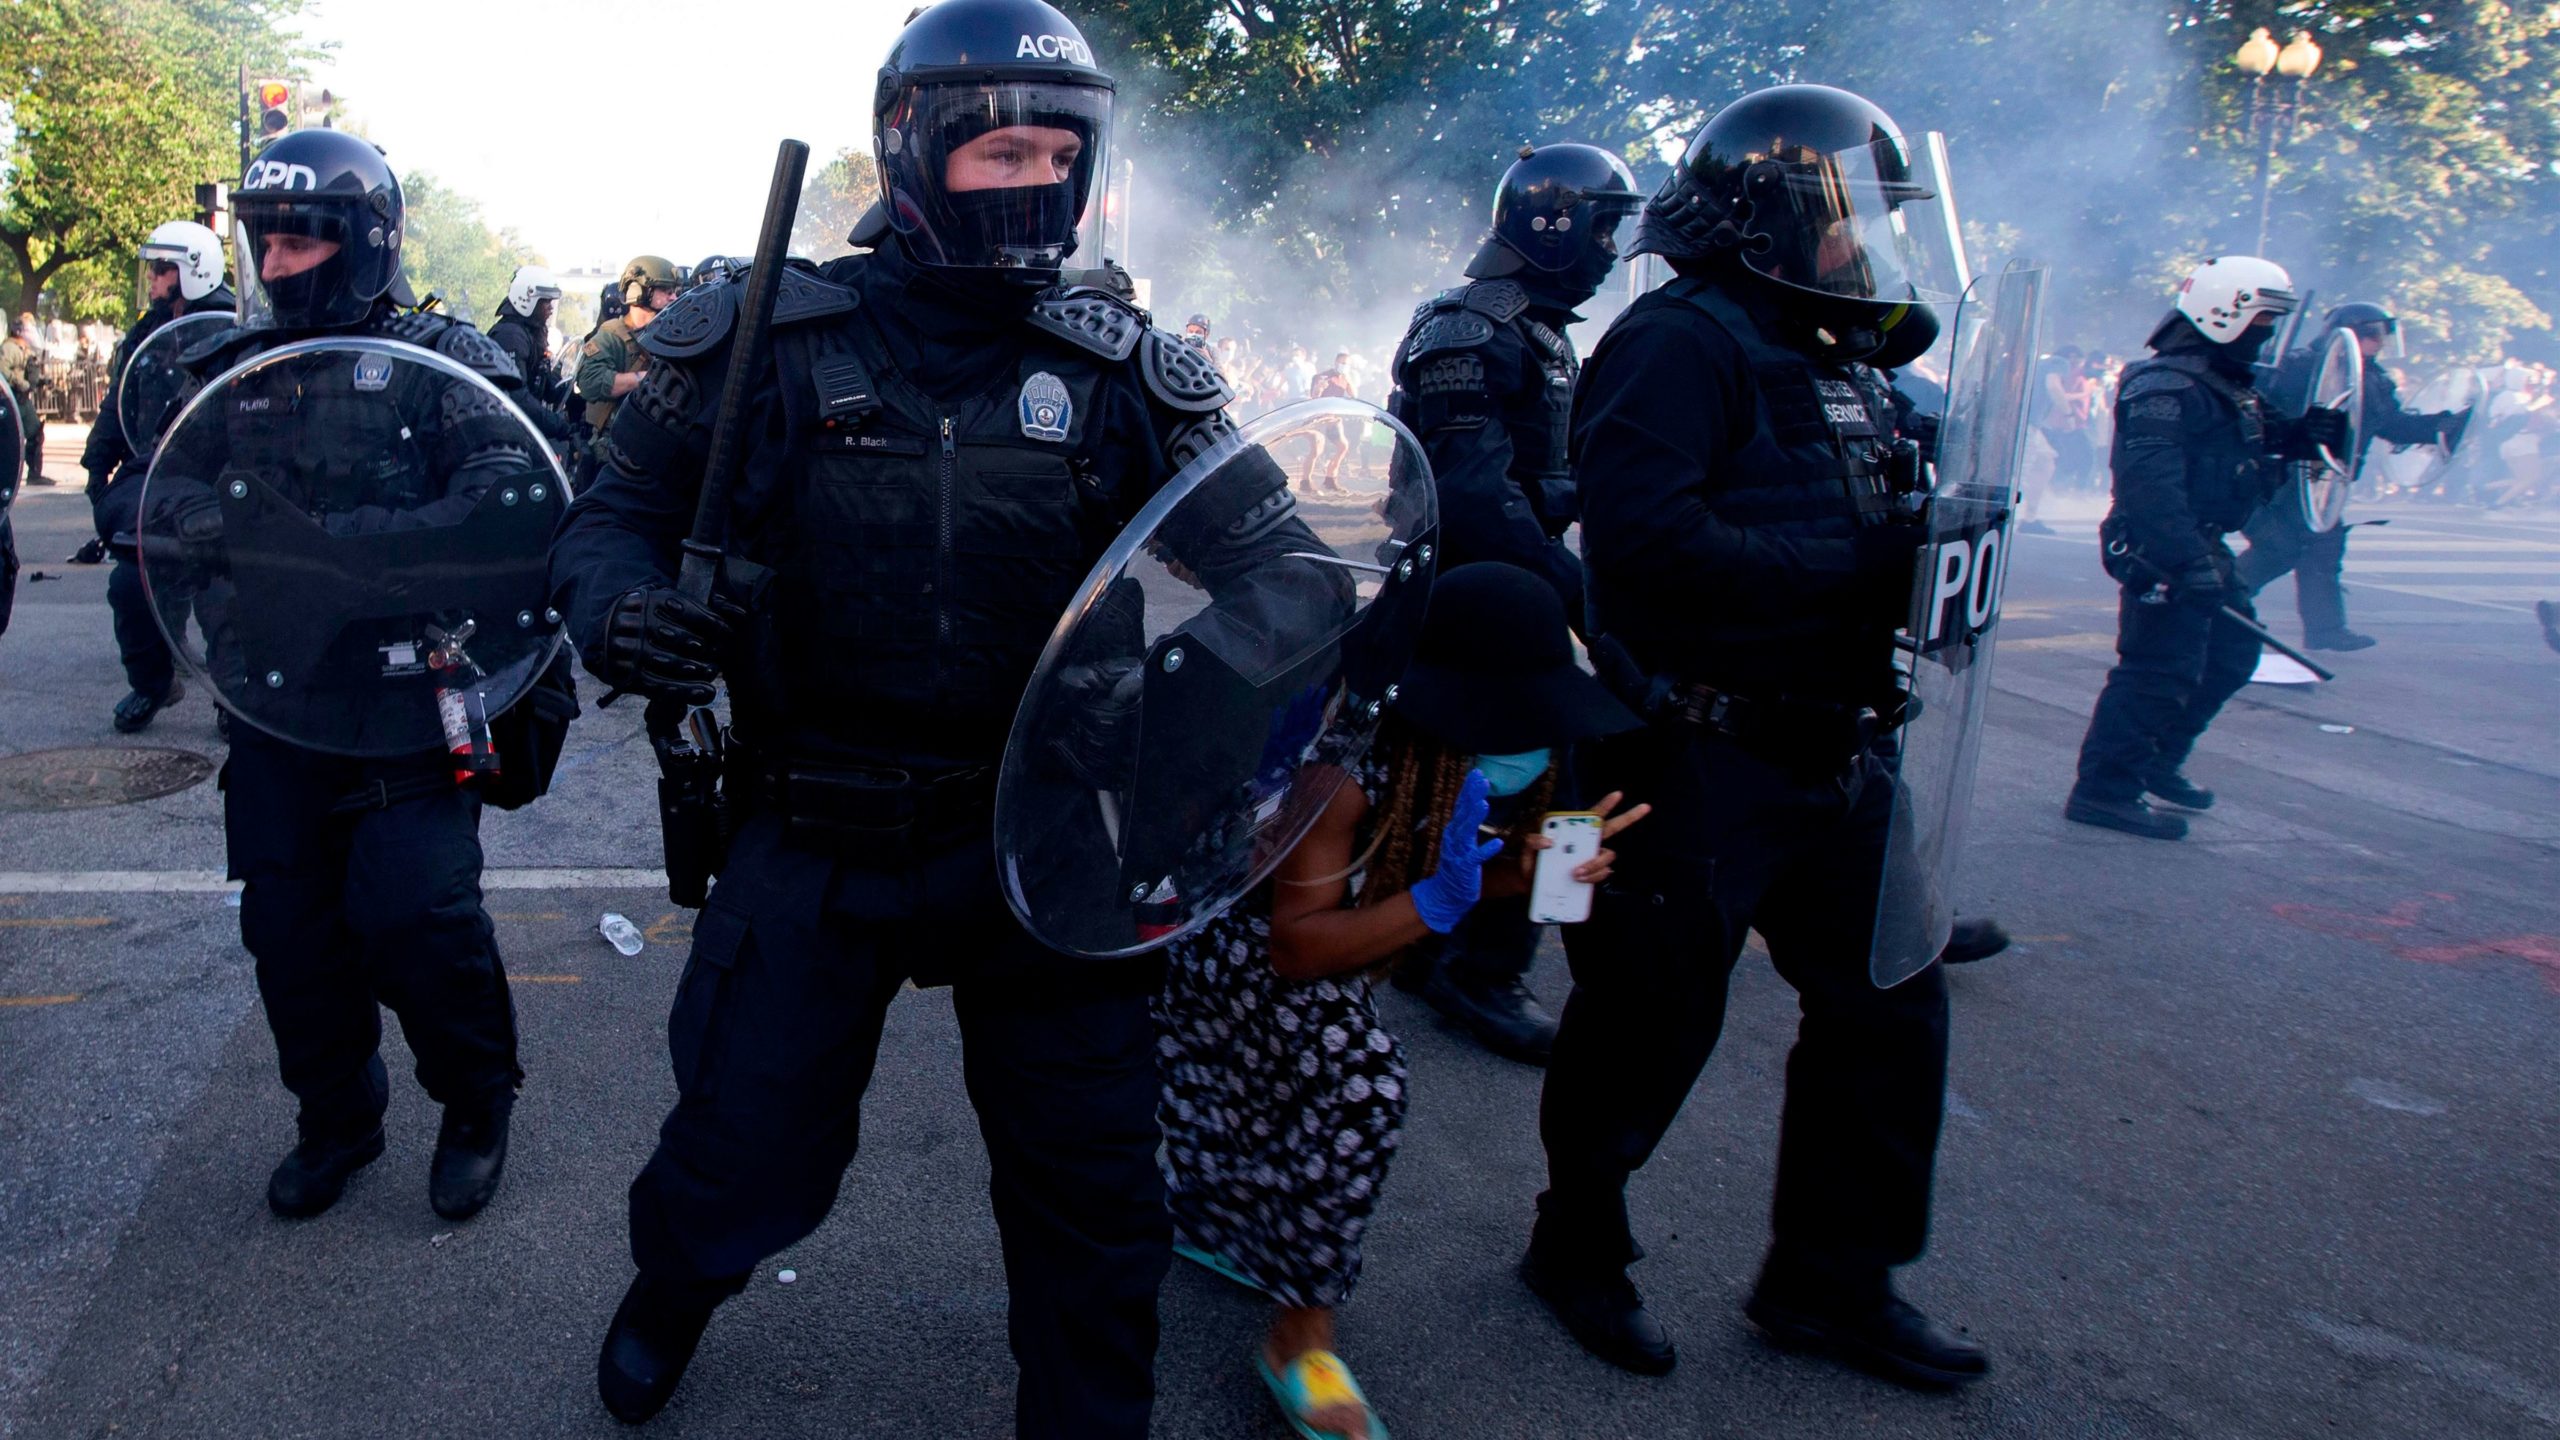 Police using tear gas and force to push protesters away from the White House; June 1, 2020. (Photo: Jose Luis Magana, Getty Images)